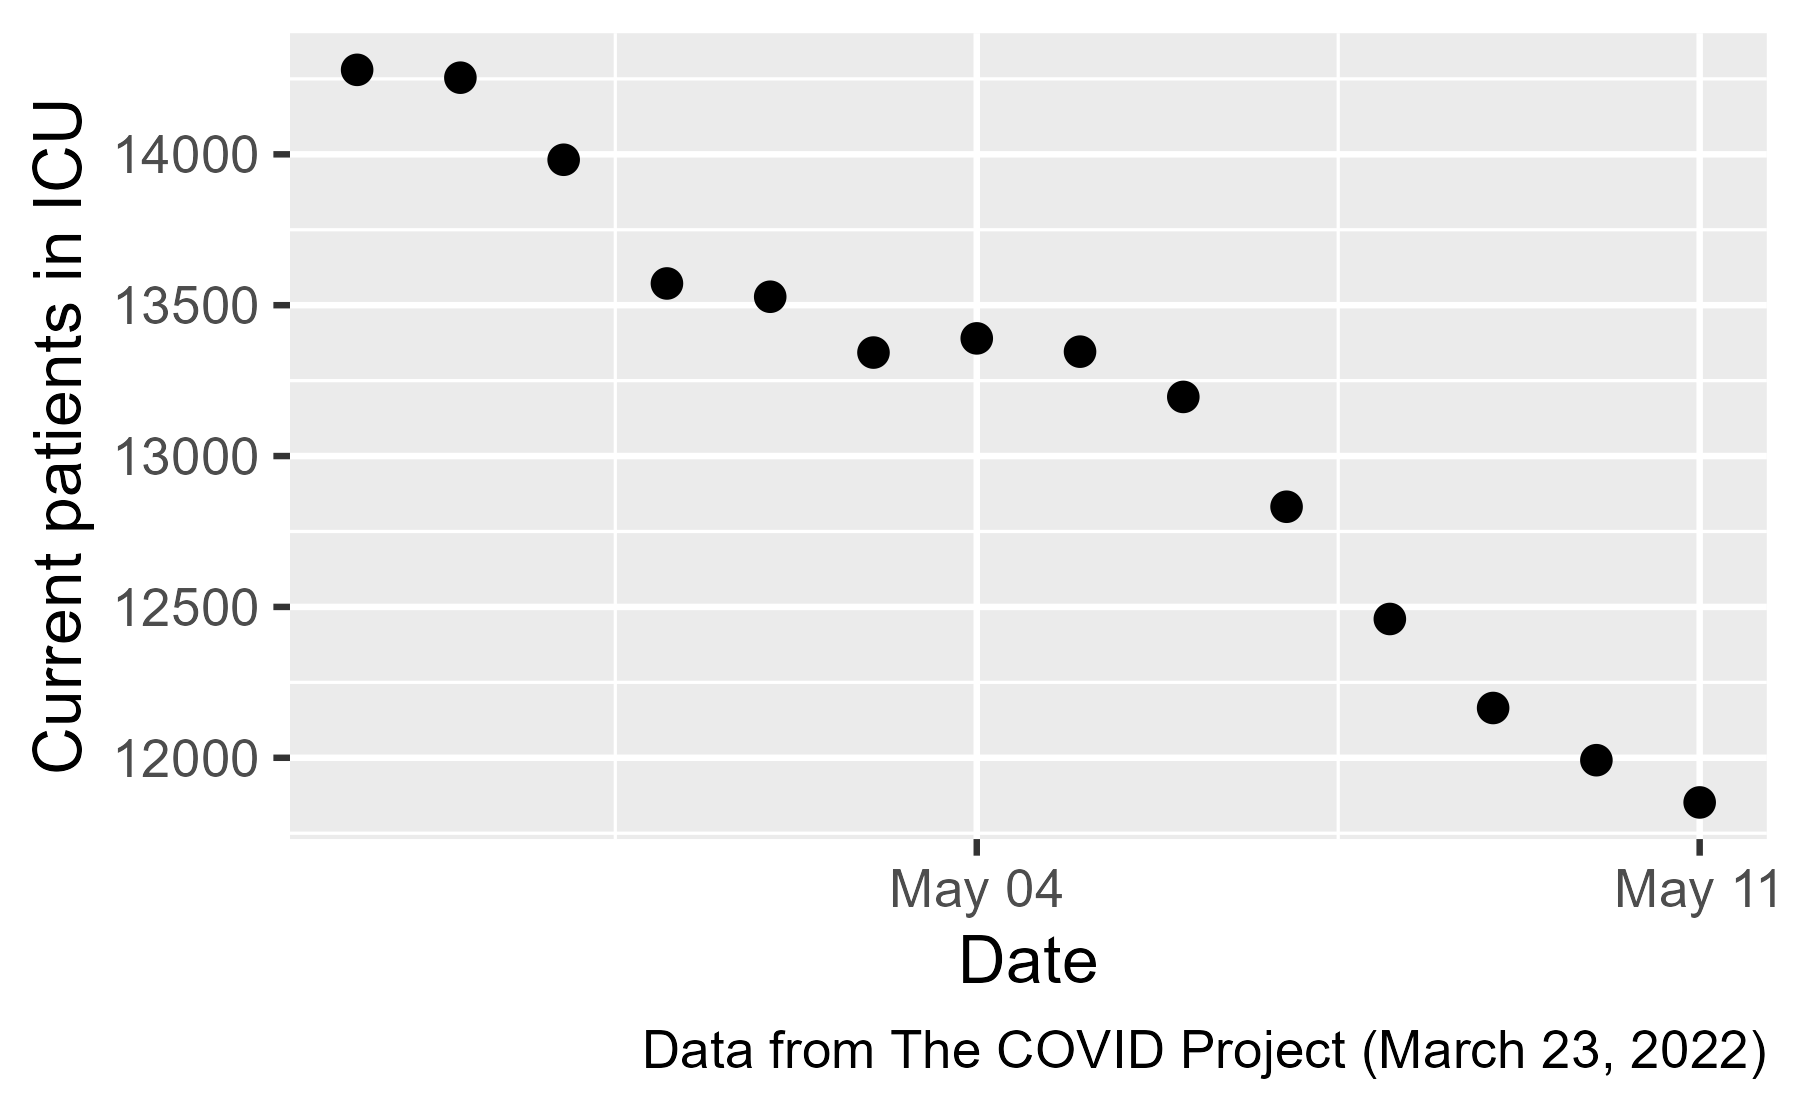 A plot showing the total number of Covid-19 patients in ICU beds from April 28, 2020 to May 11, 2020. The numbers steadily decrease from around 14,000 to 12,000.